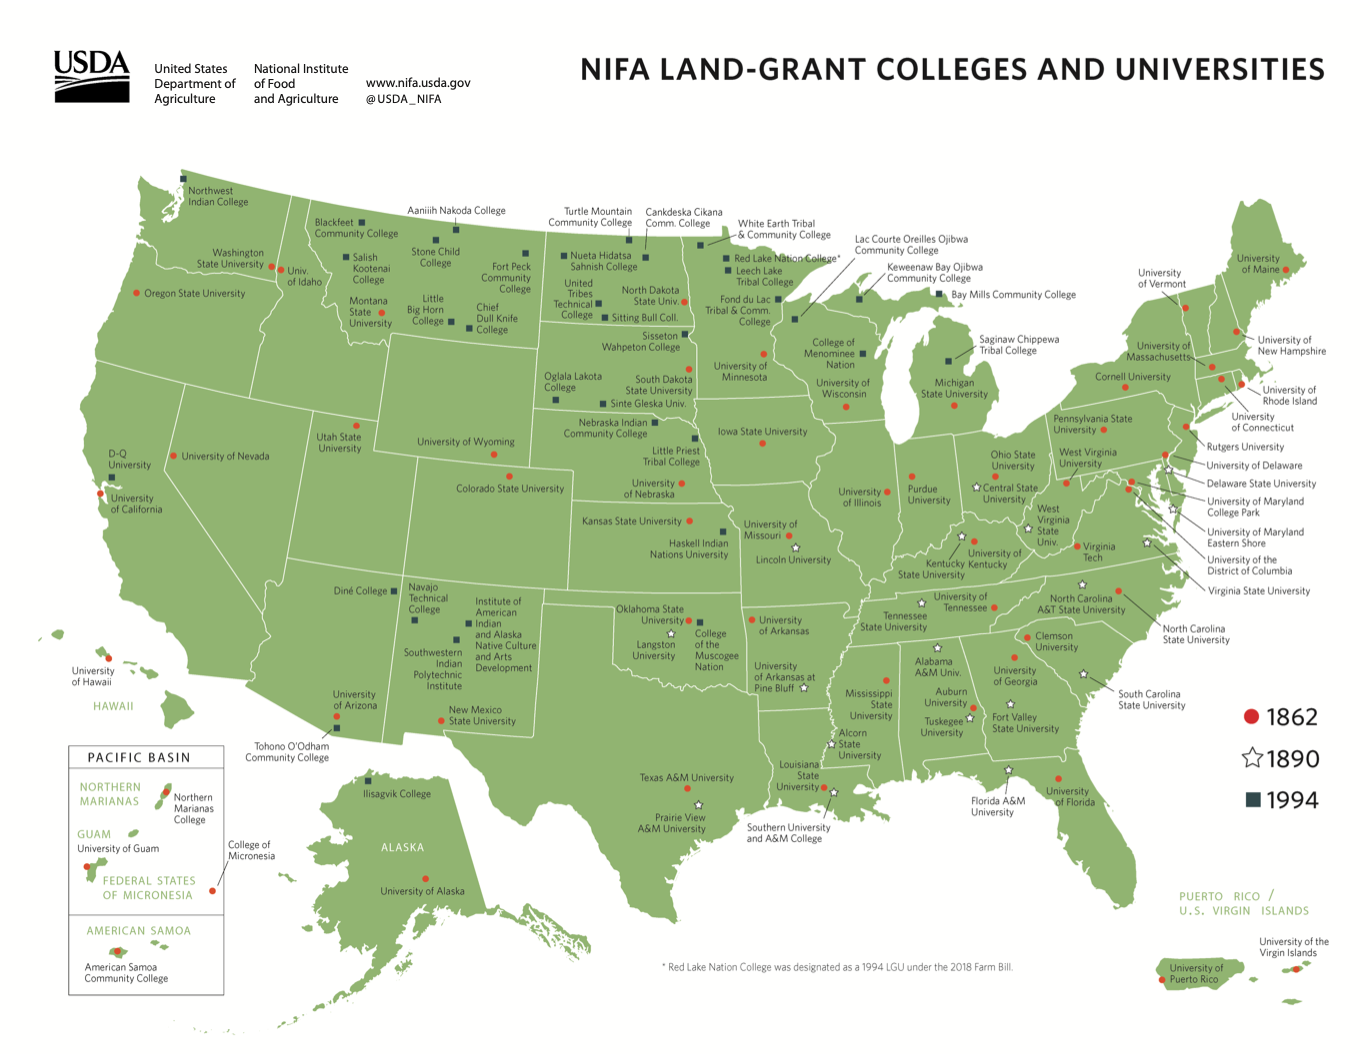 There are 112 land-grant universities in the United States of America